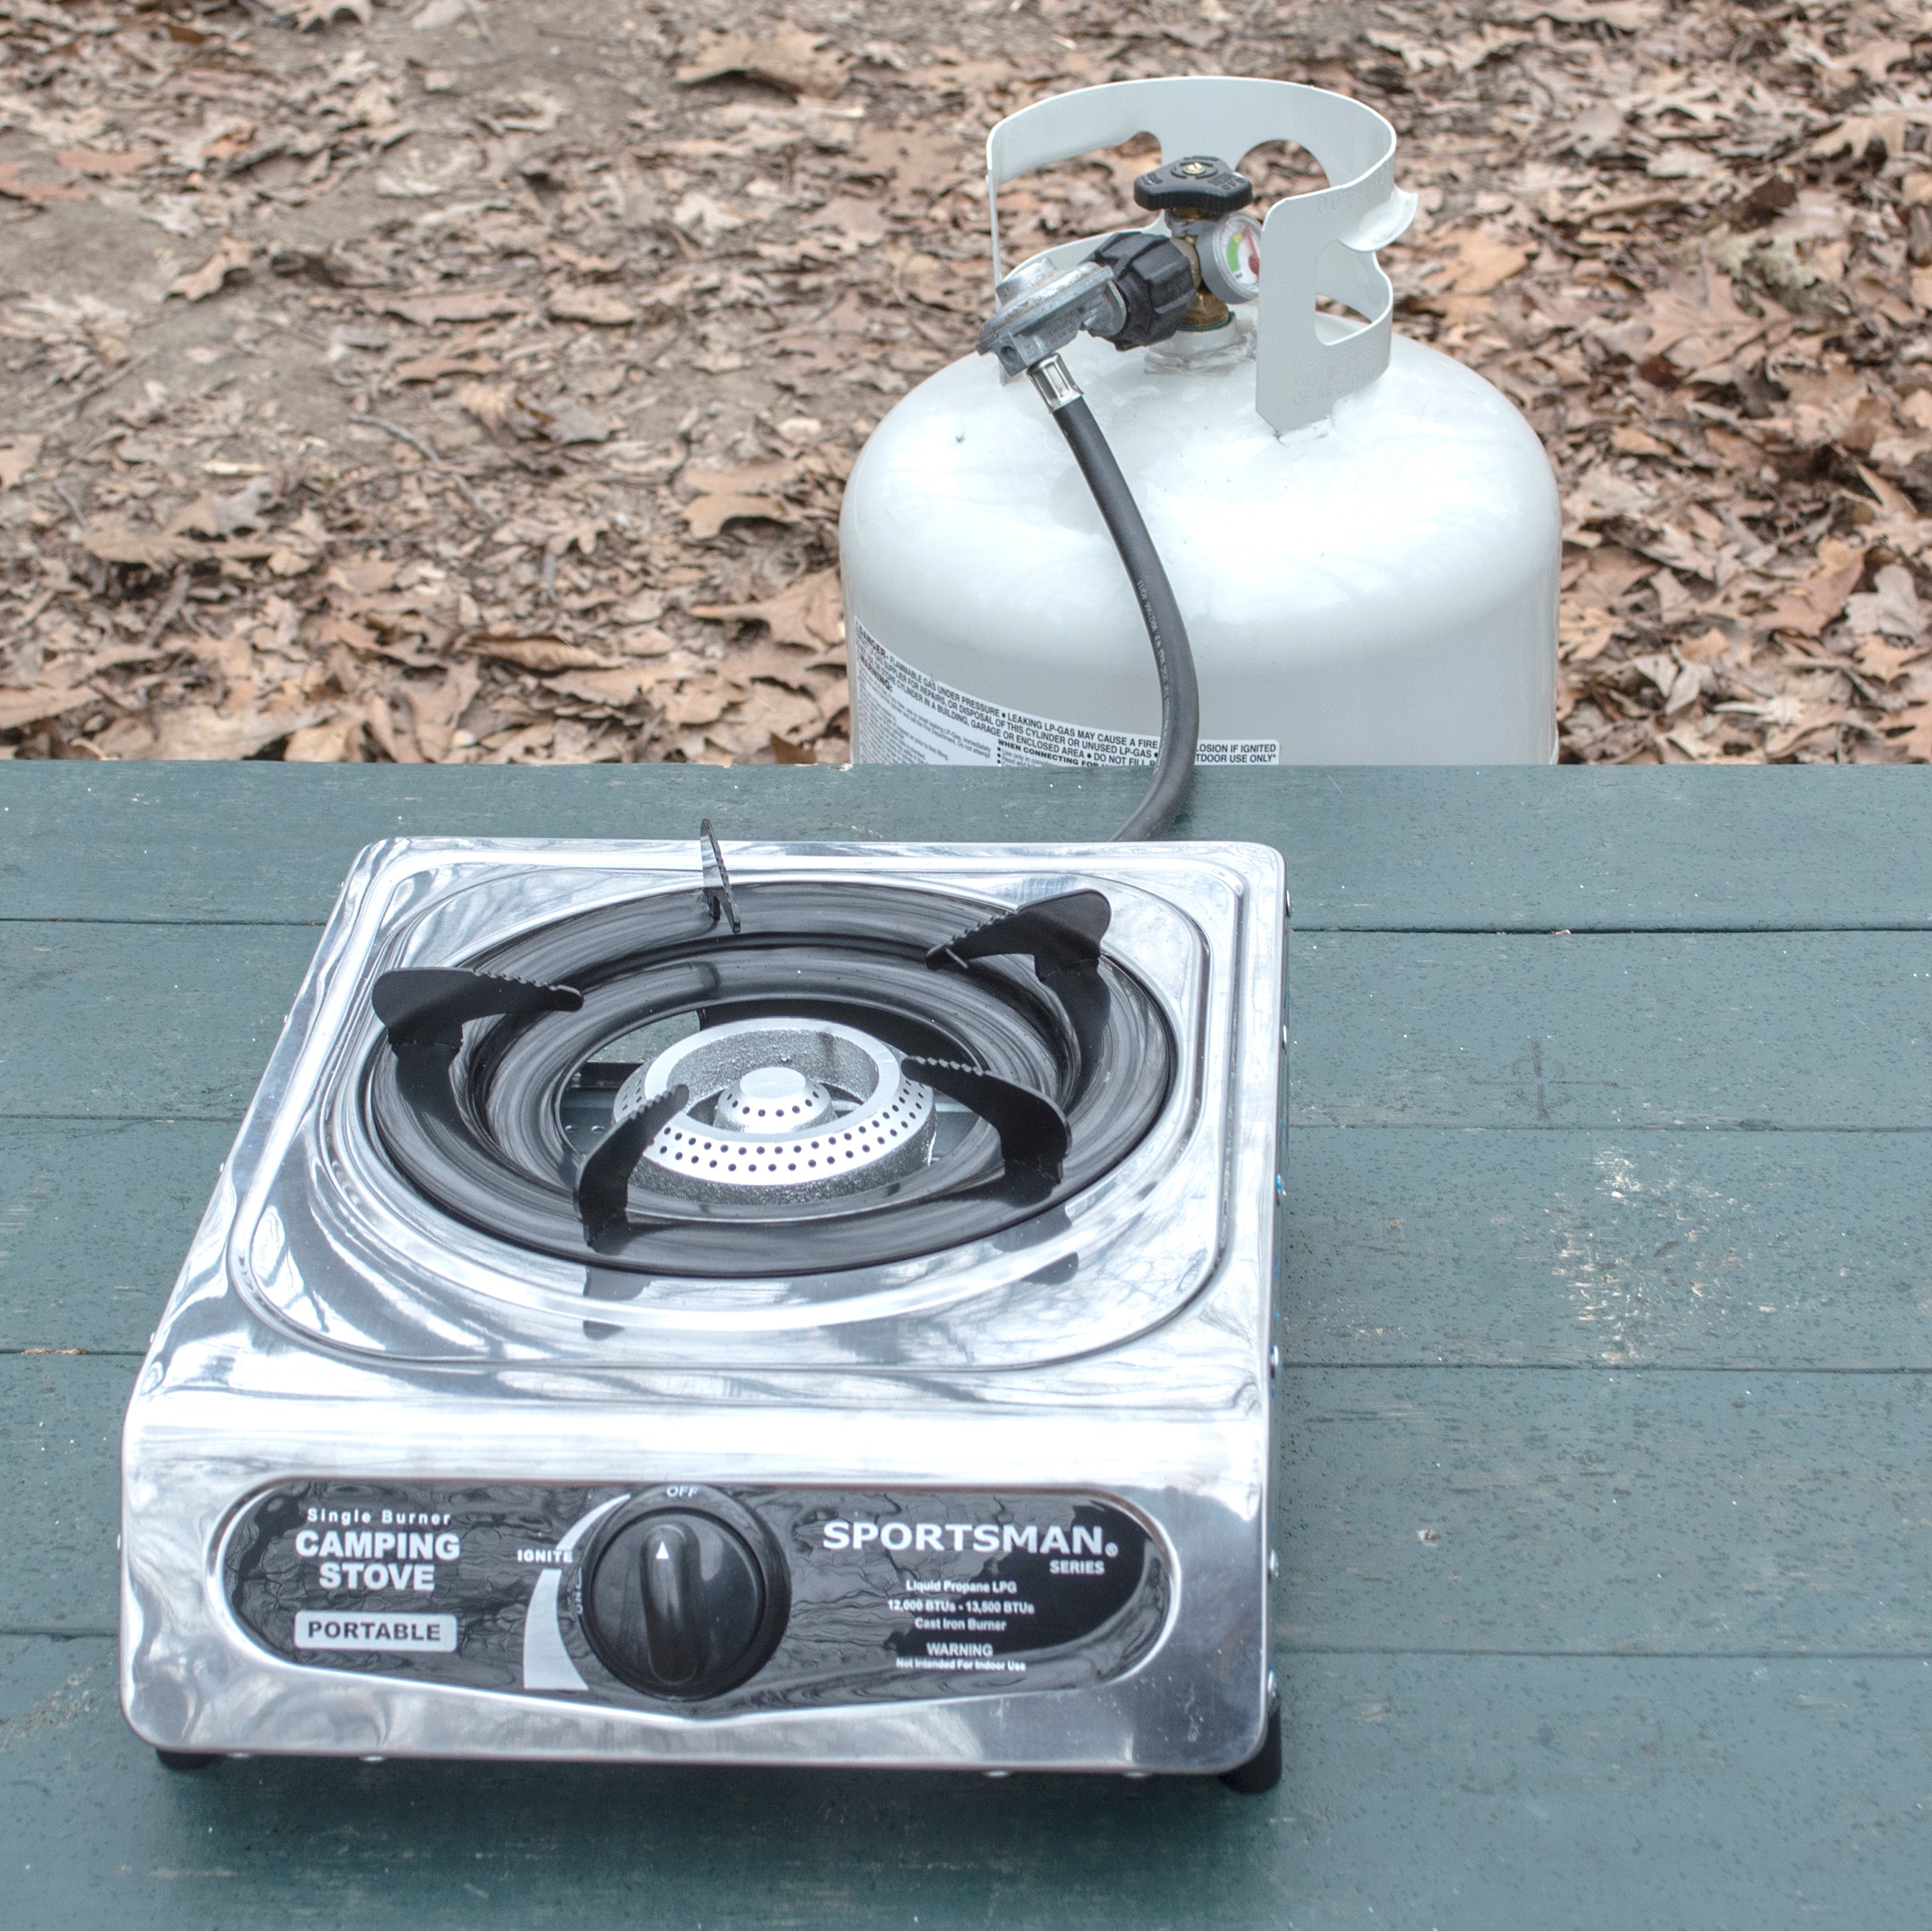 Sportsman Series 1-Burner 12.5-in Propane 1-lb Cylinder Electronic Steel  Outdoor Stove at